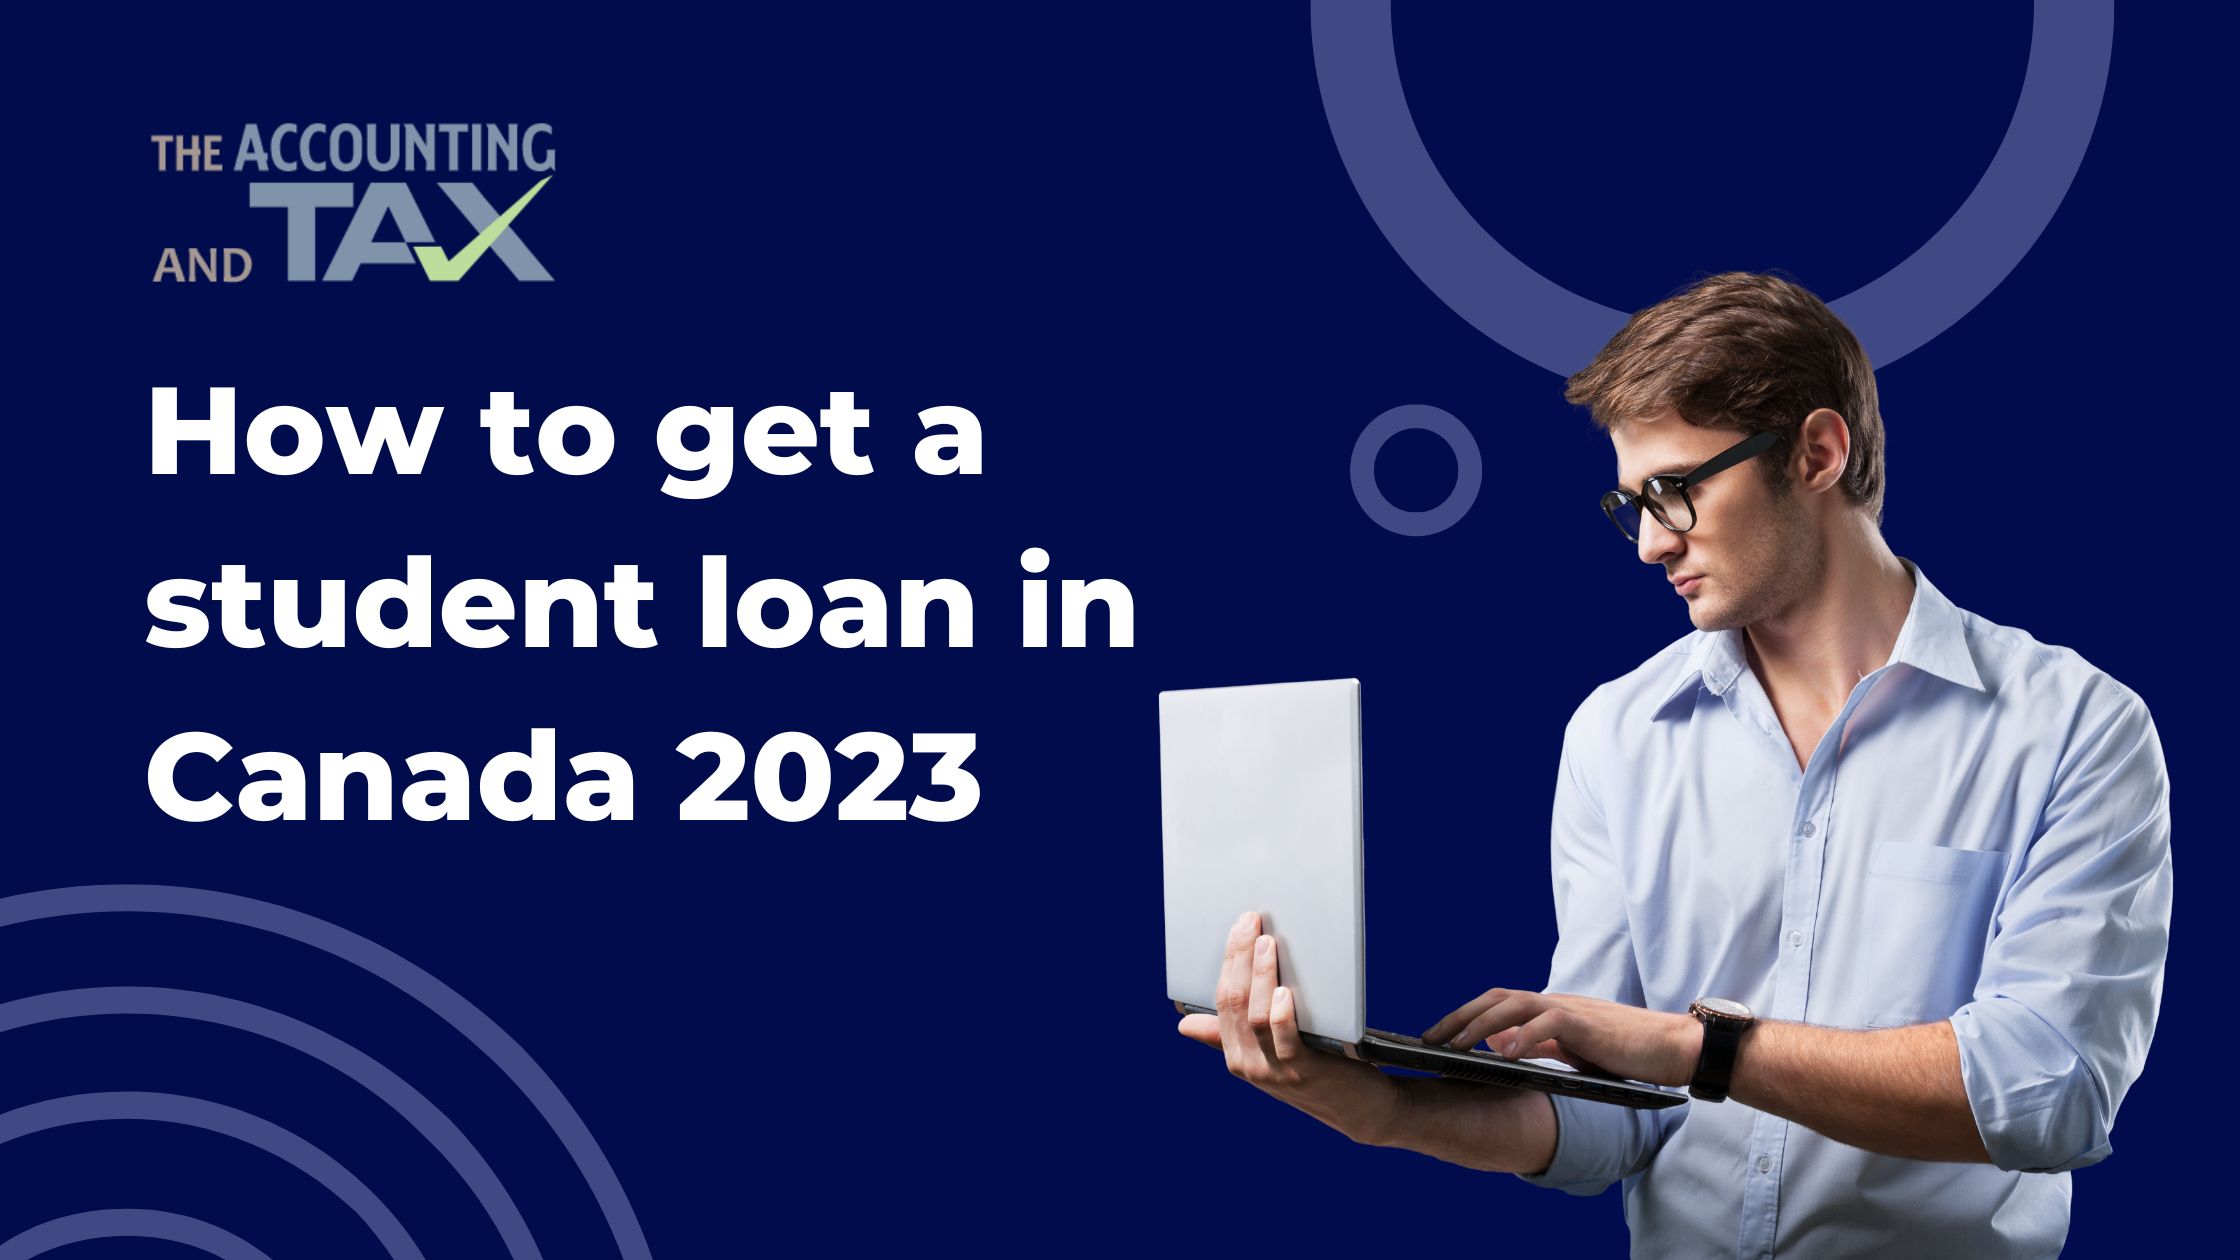 How to get a student loan in Canada 2023